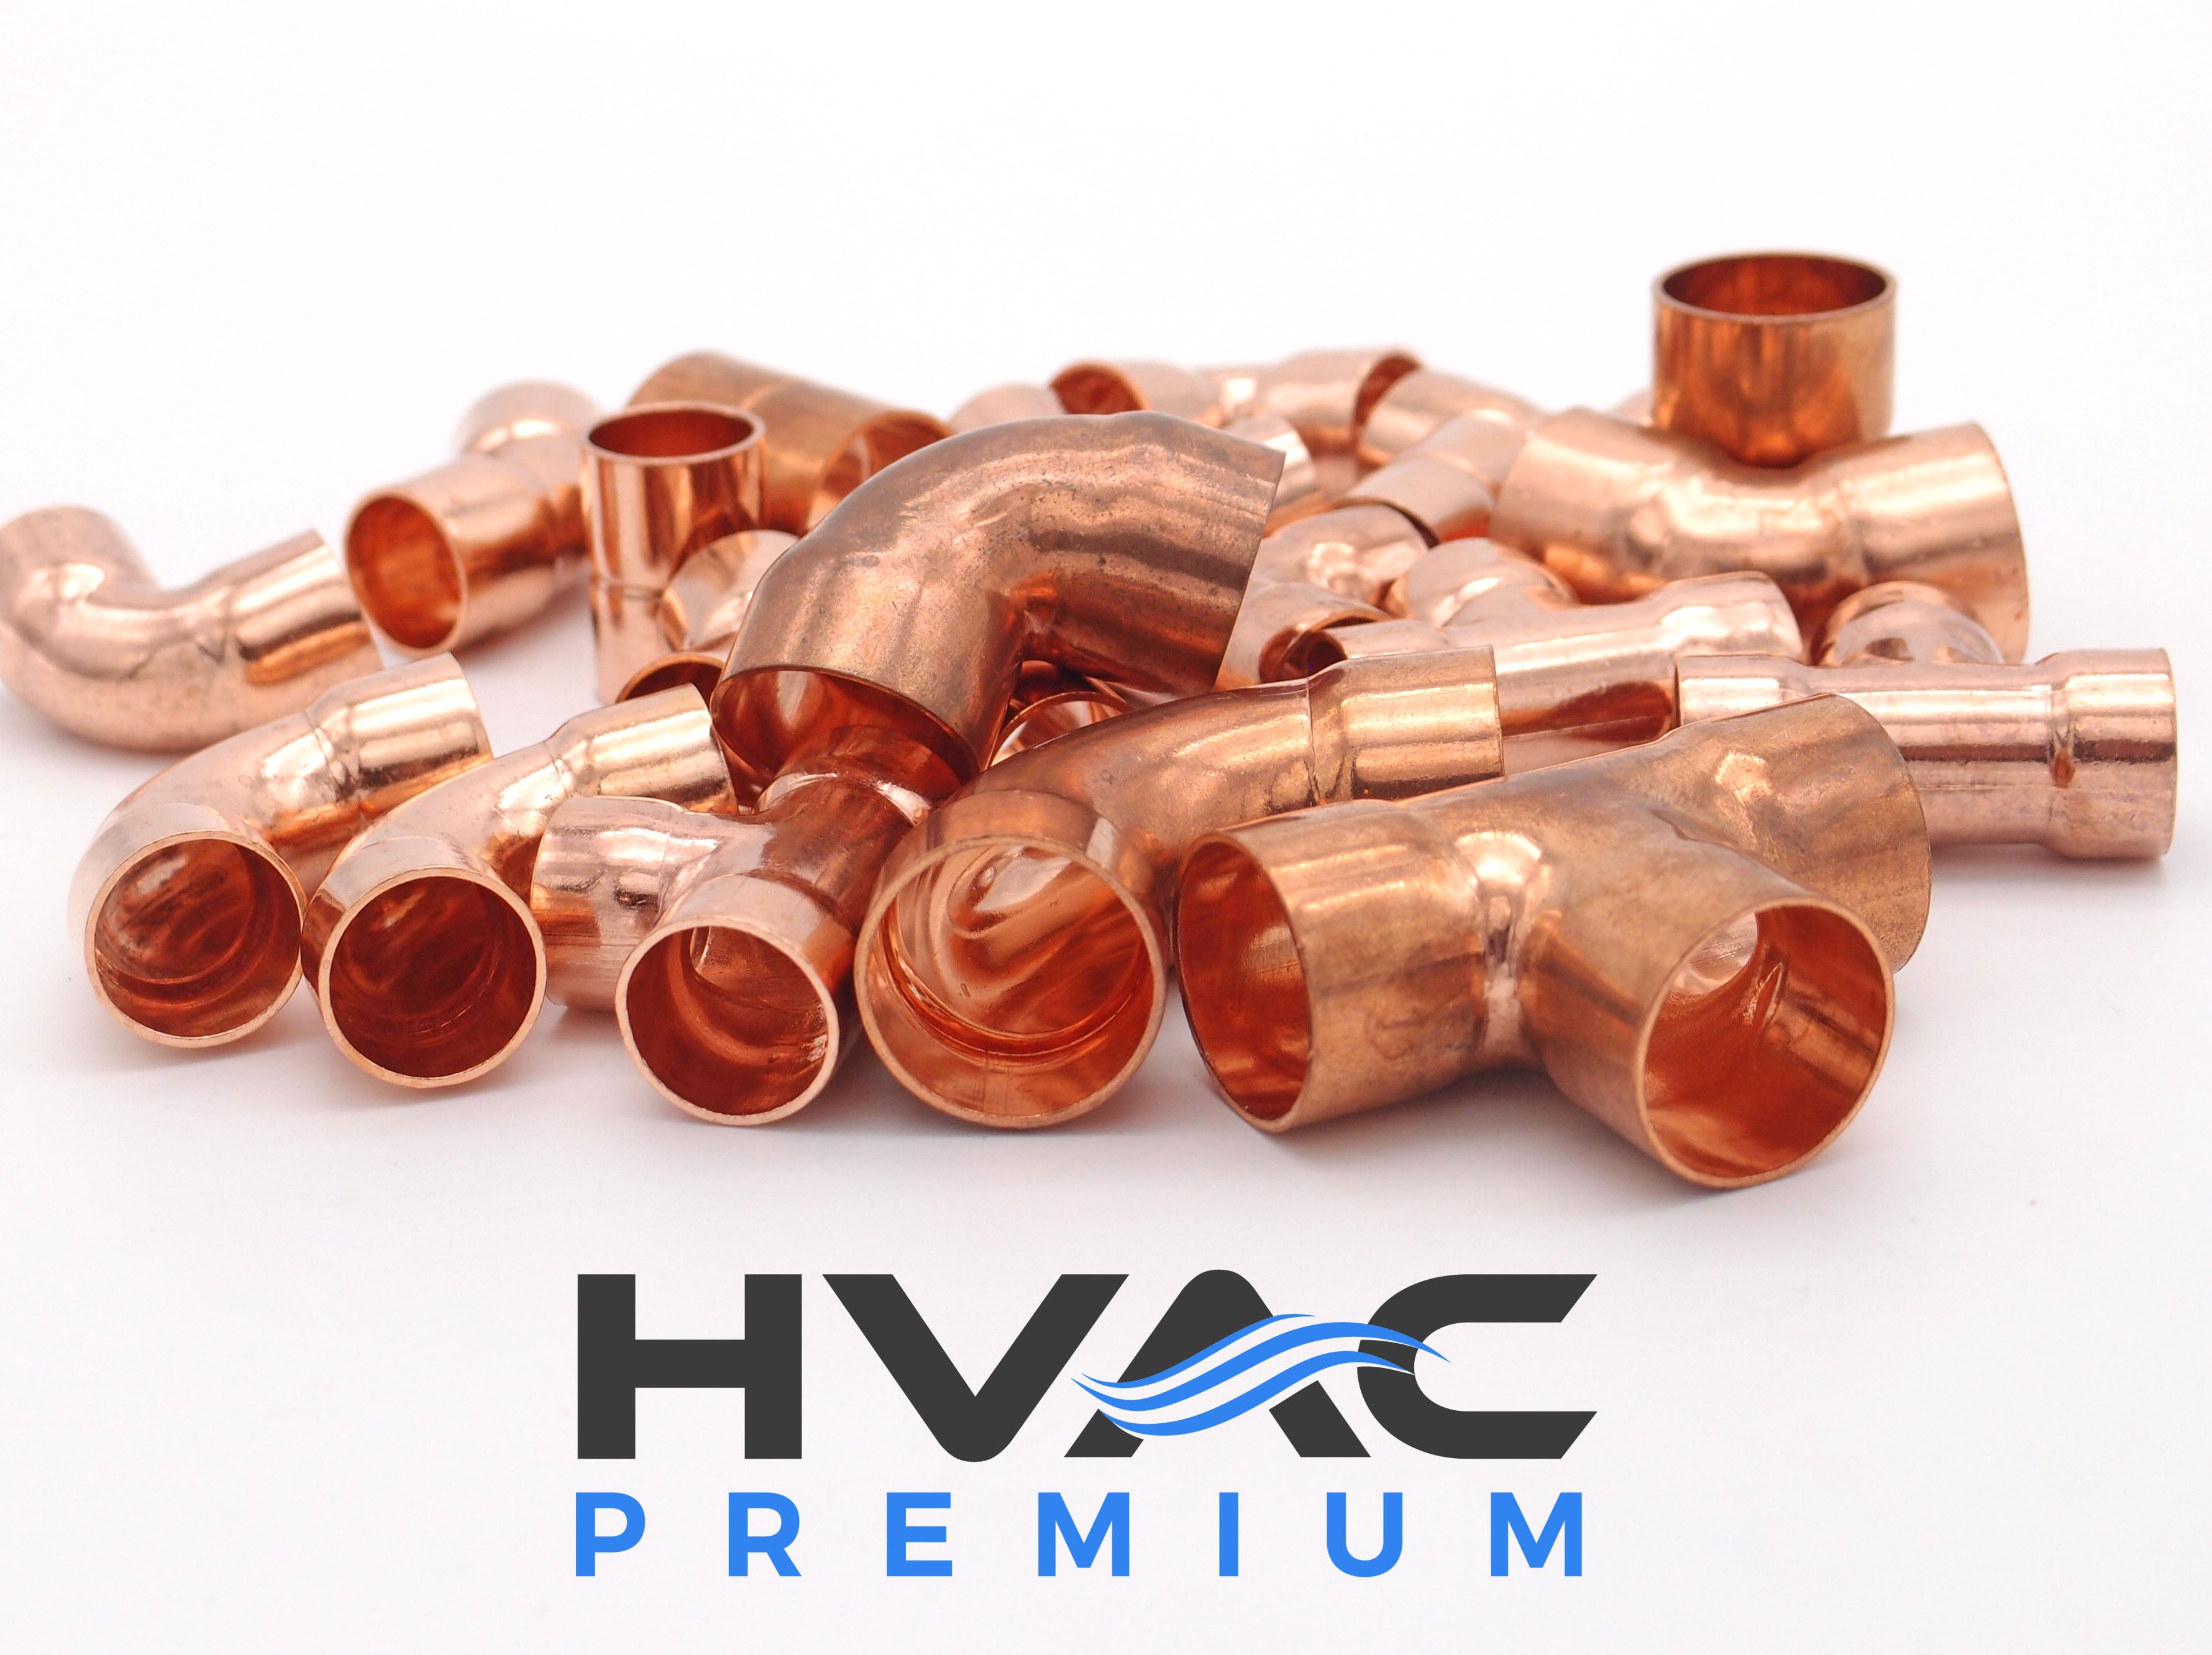 Copper Fitting 7/8 Inch (HVAC Outer Dimension) 3/4 Inch (Plumbing Inner Dimension) - Straight Copper Coupling Fittings With Rolled Tube Stop & HVAC – 99.9% Pure Copper - 10 Pack